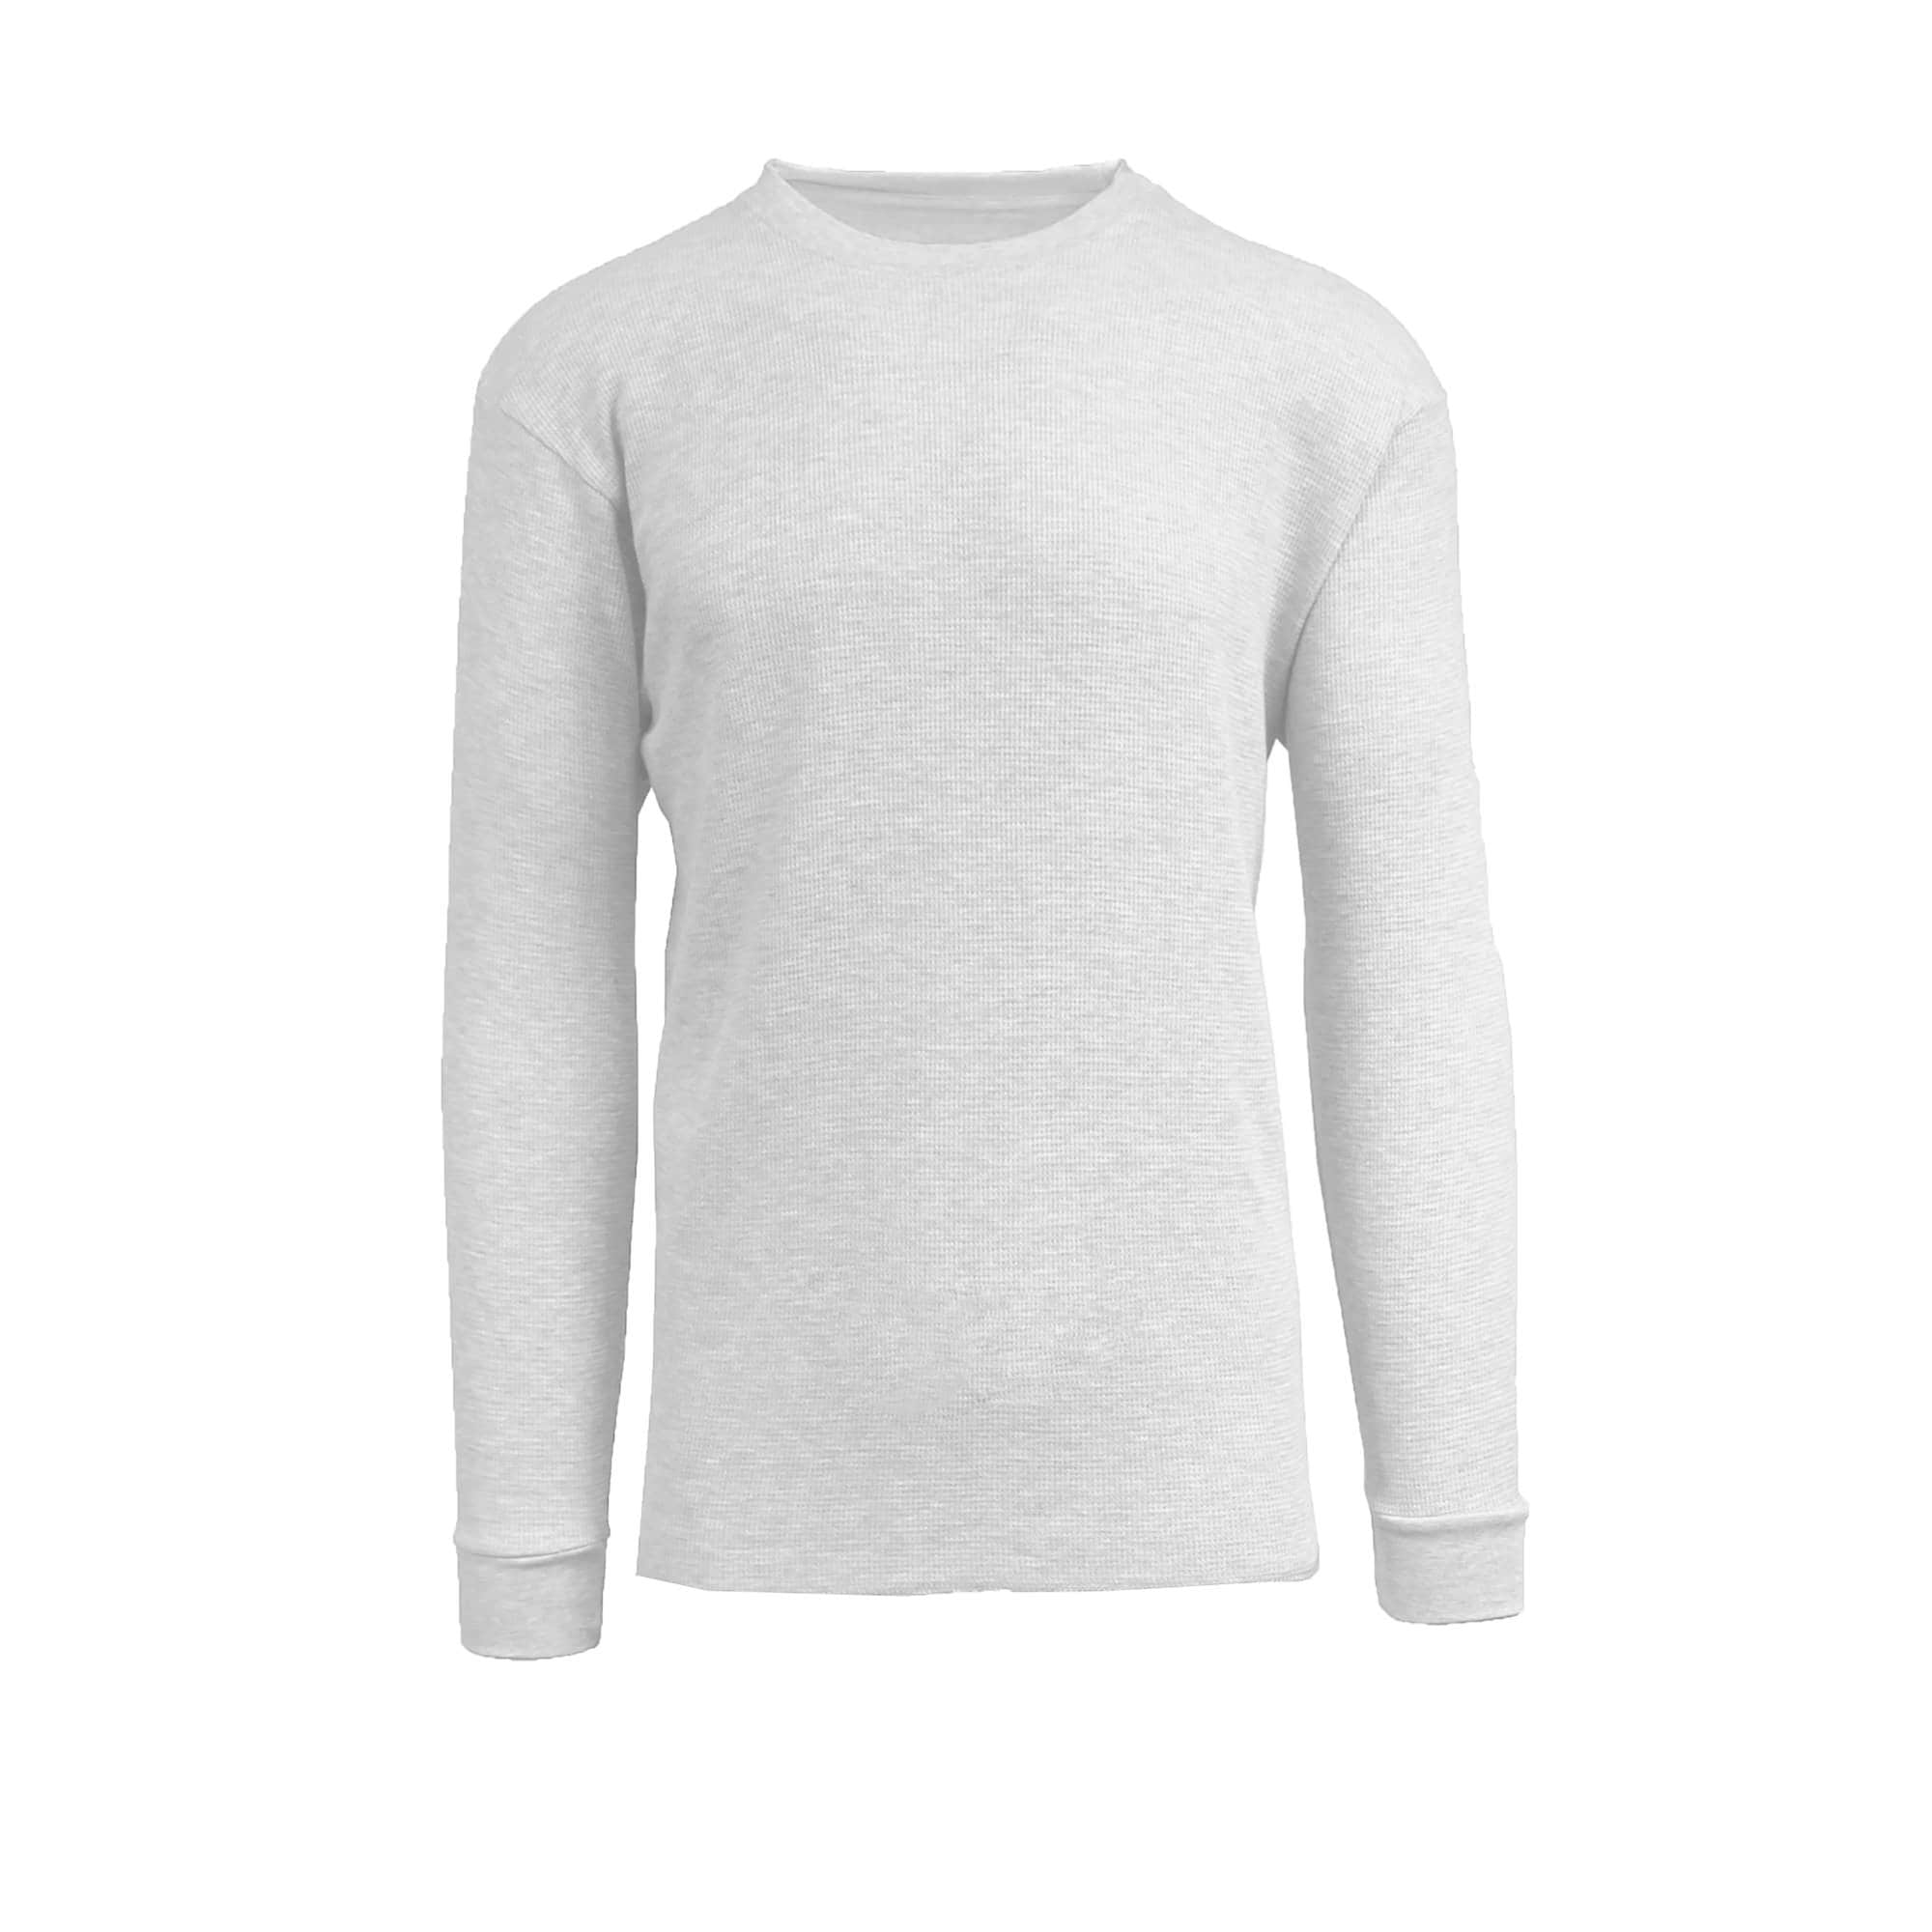 fitted thermal shirts